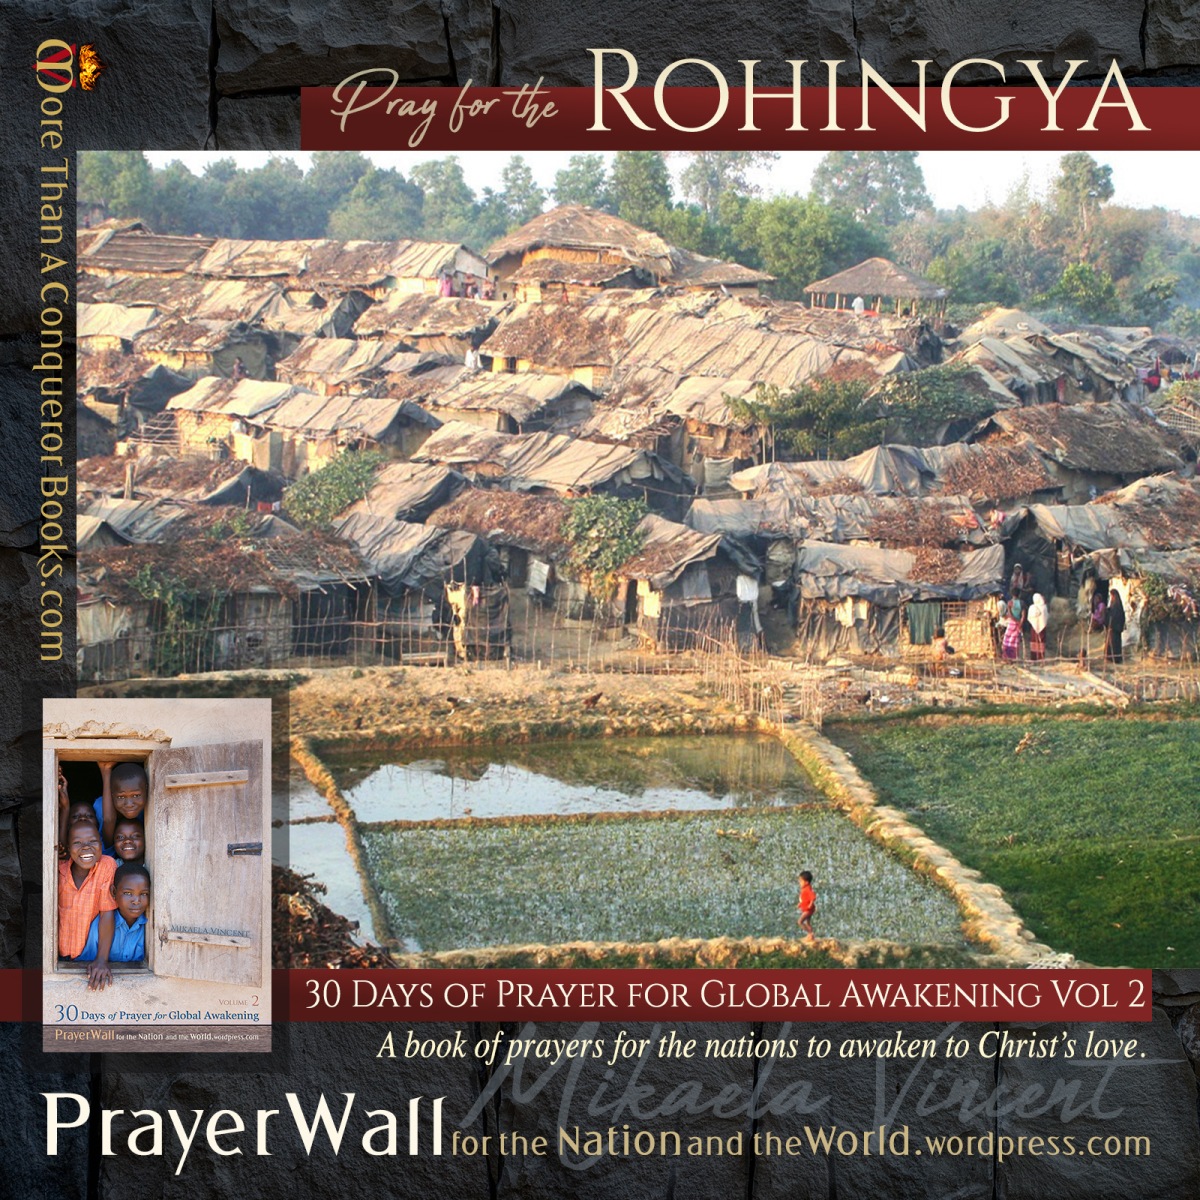 Fire in Rohingya Huts, but also in Many Hearts